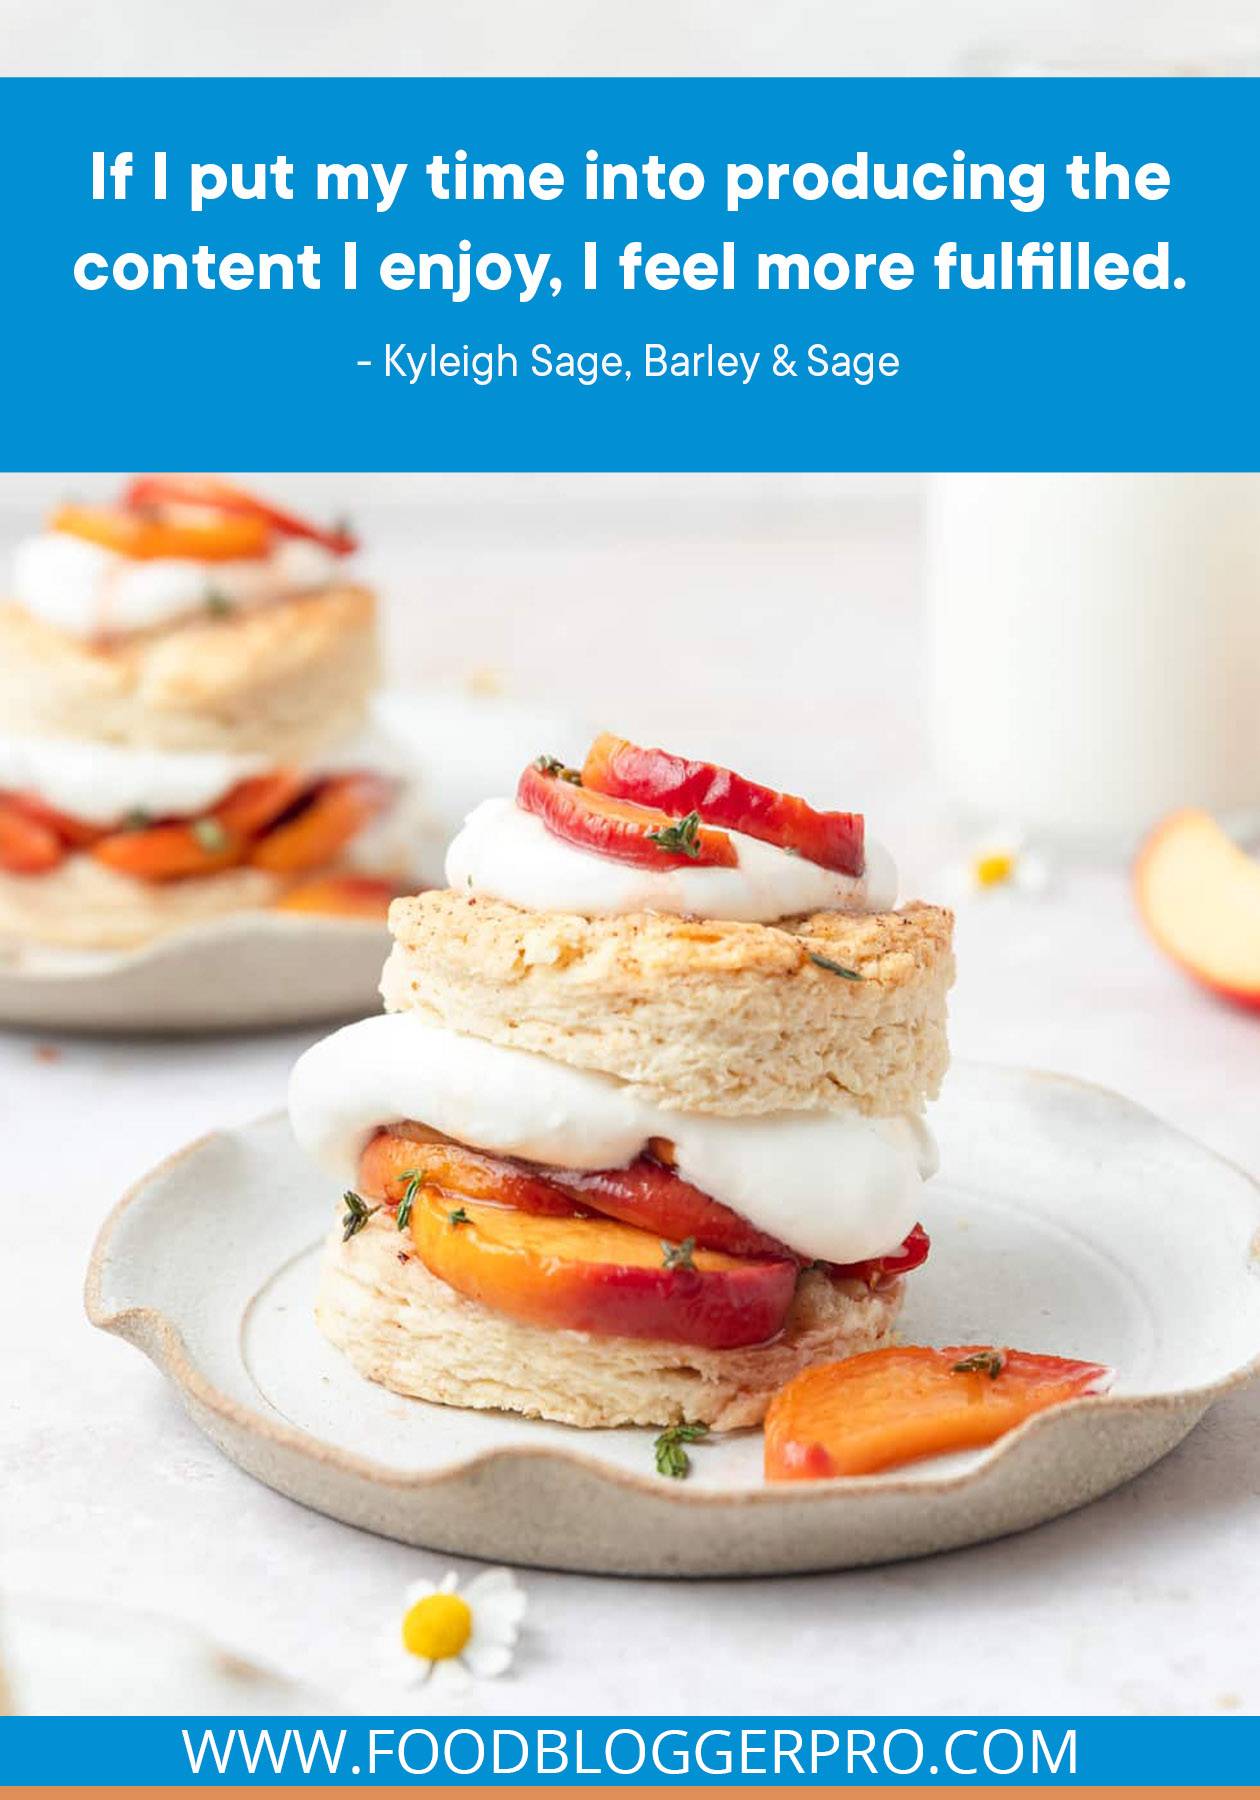 A photograph of peach shortcakes with a quote from Kyleigh Sage's episode of The Food Blogger Pro Podcast: "If I put my time into producing the content I enjoy, I feel more fulfilled."